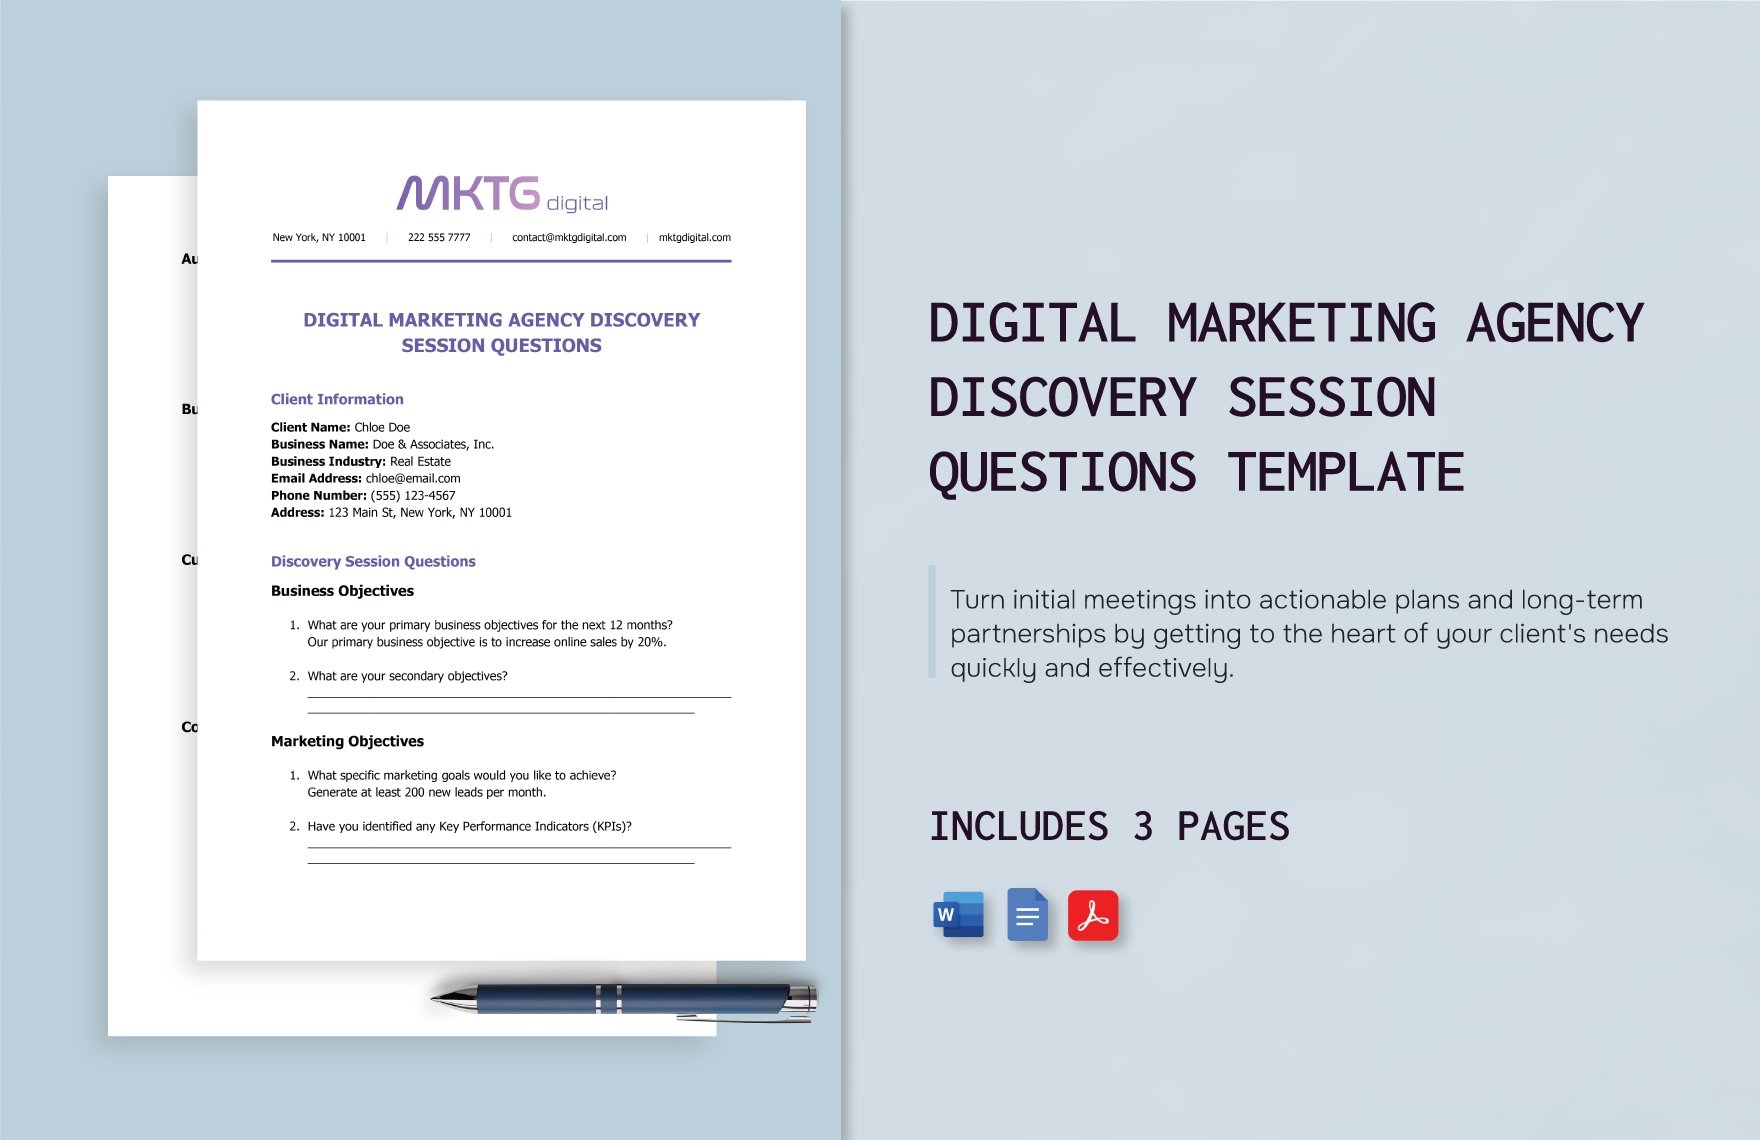 Digital Marketing Agency Discovery Session Questions Template